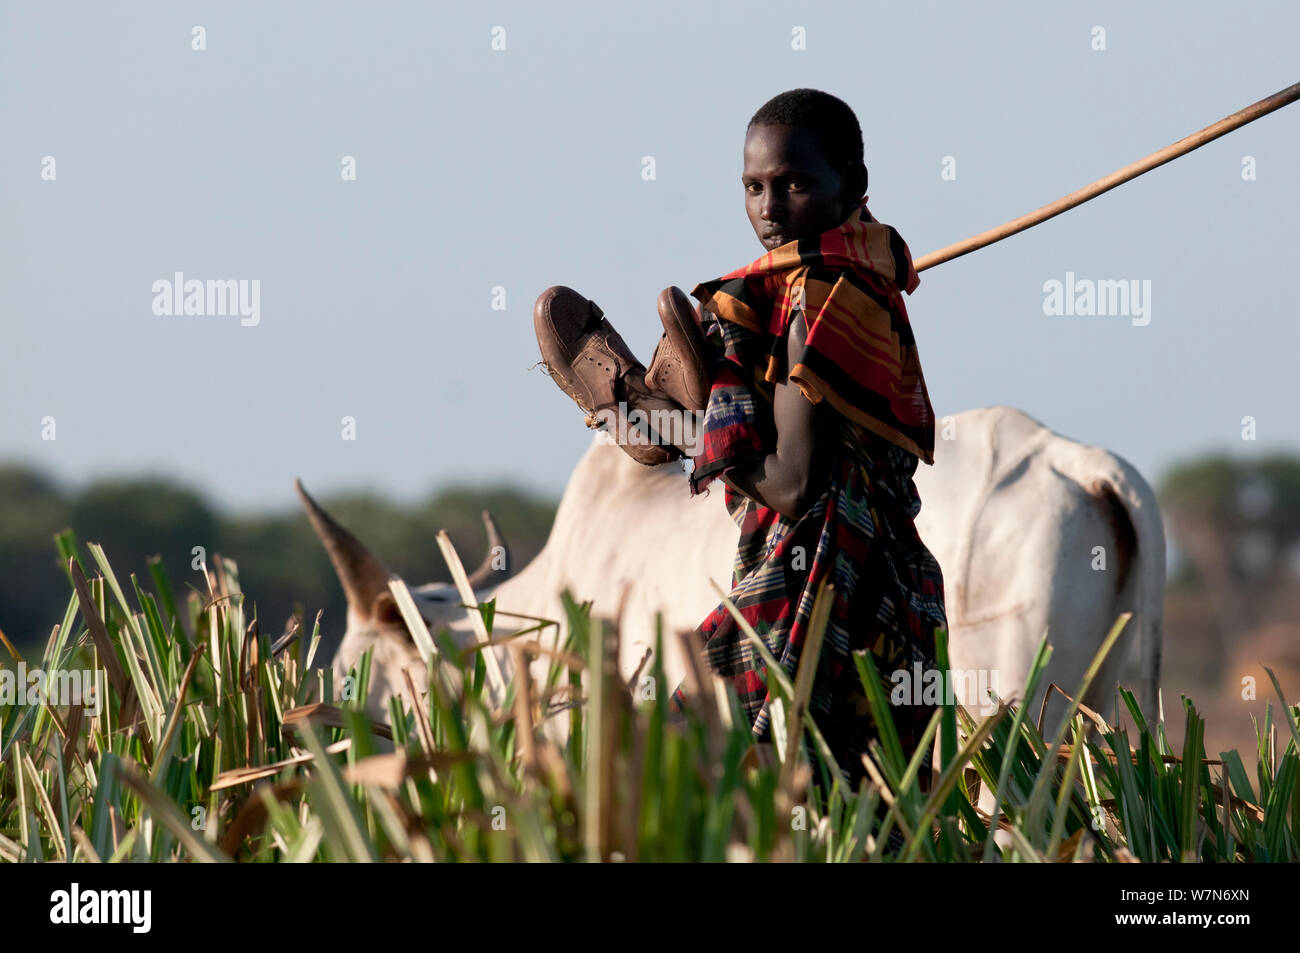 A young Orma man herds cattle, Tana River Delta, Kenya, East Africa 2011 Stock Photo